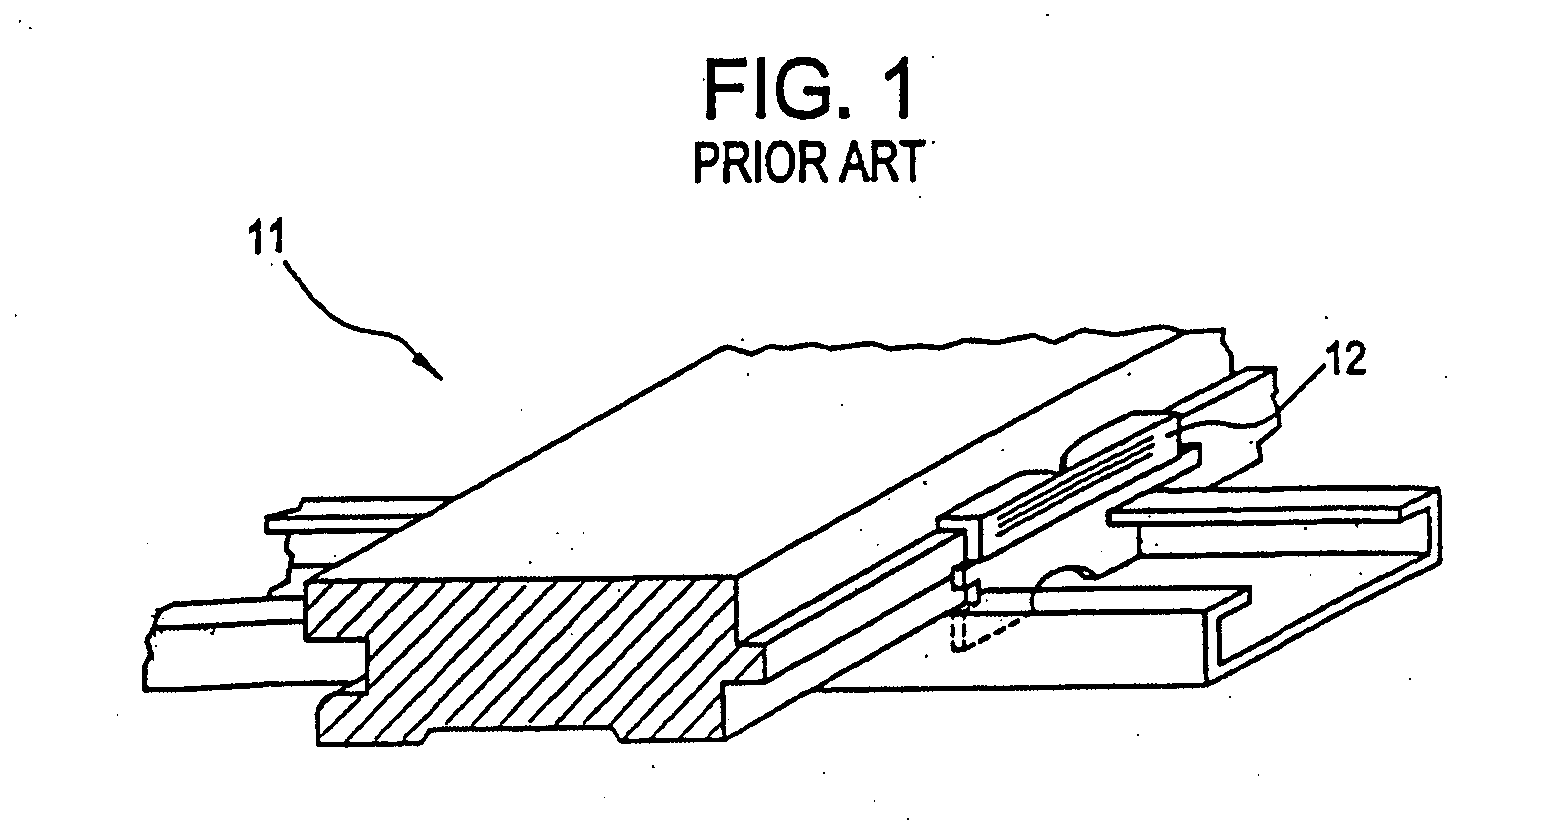 Flooring system having sub-panels with complementary edge patterns